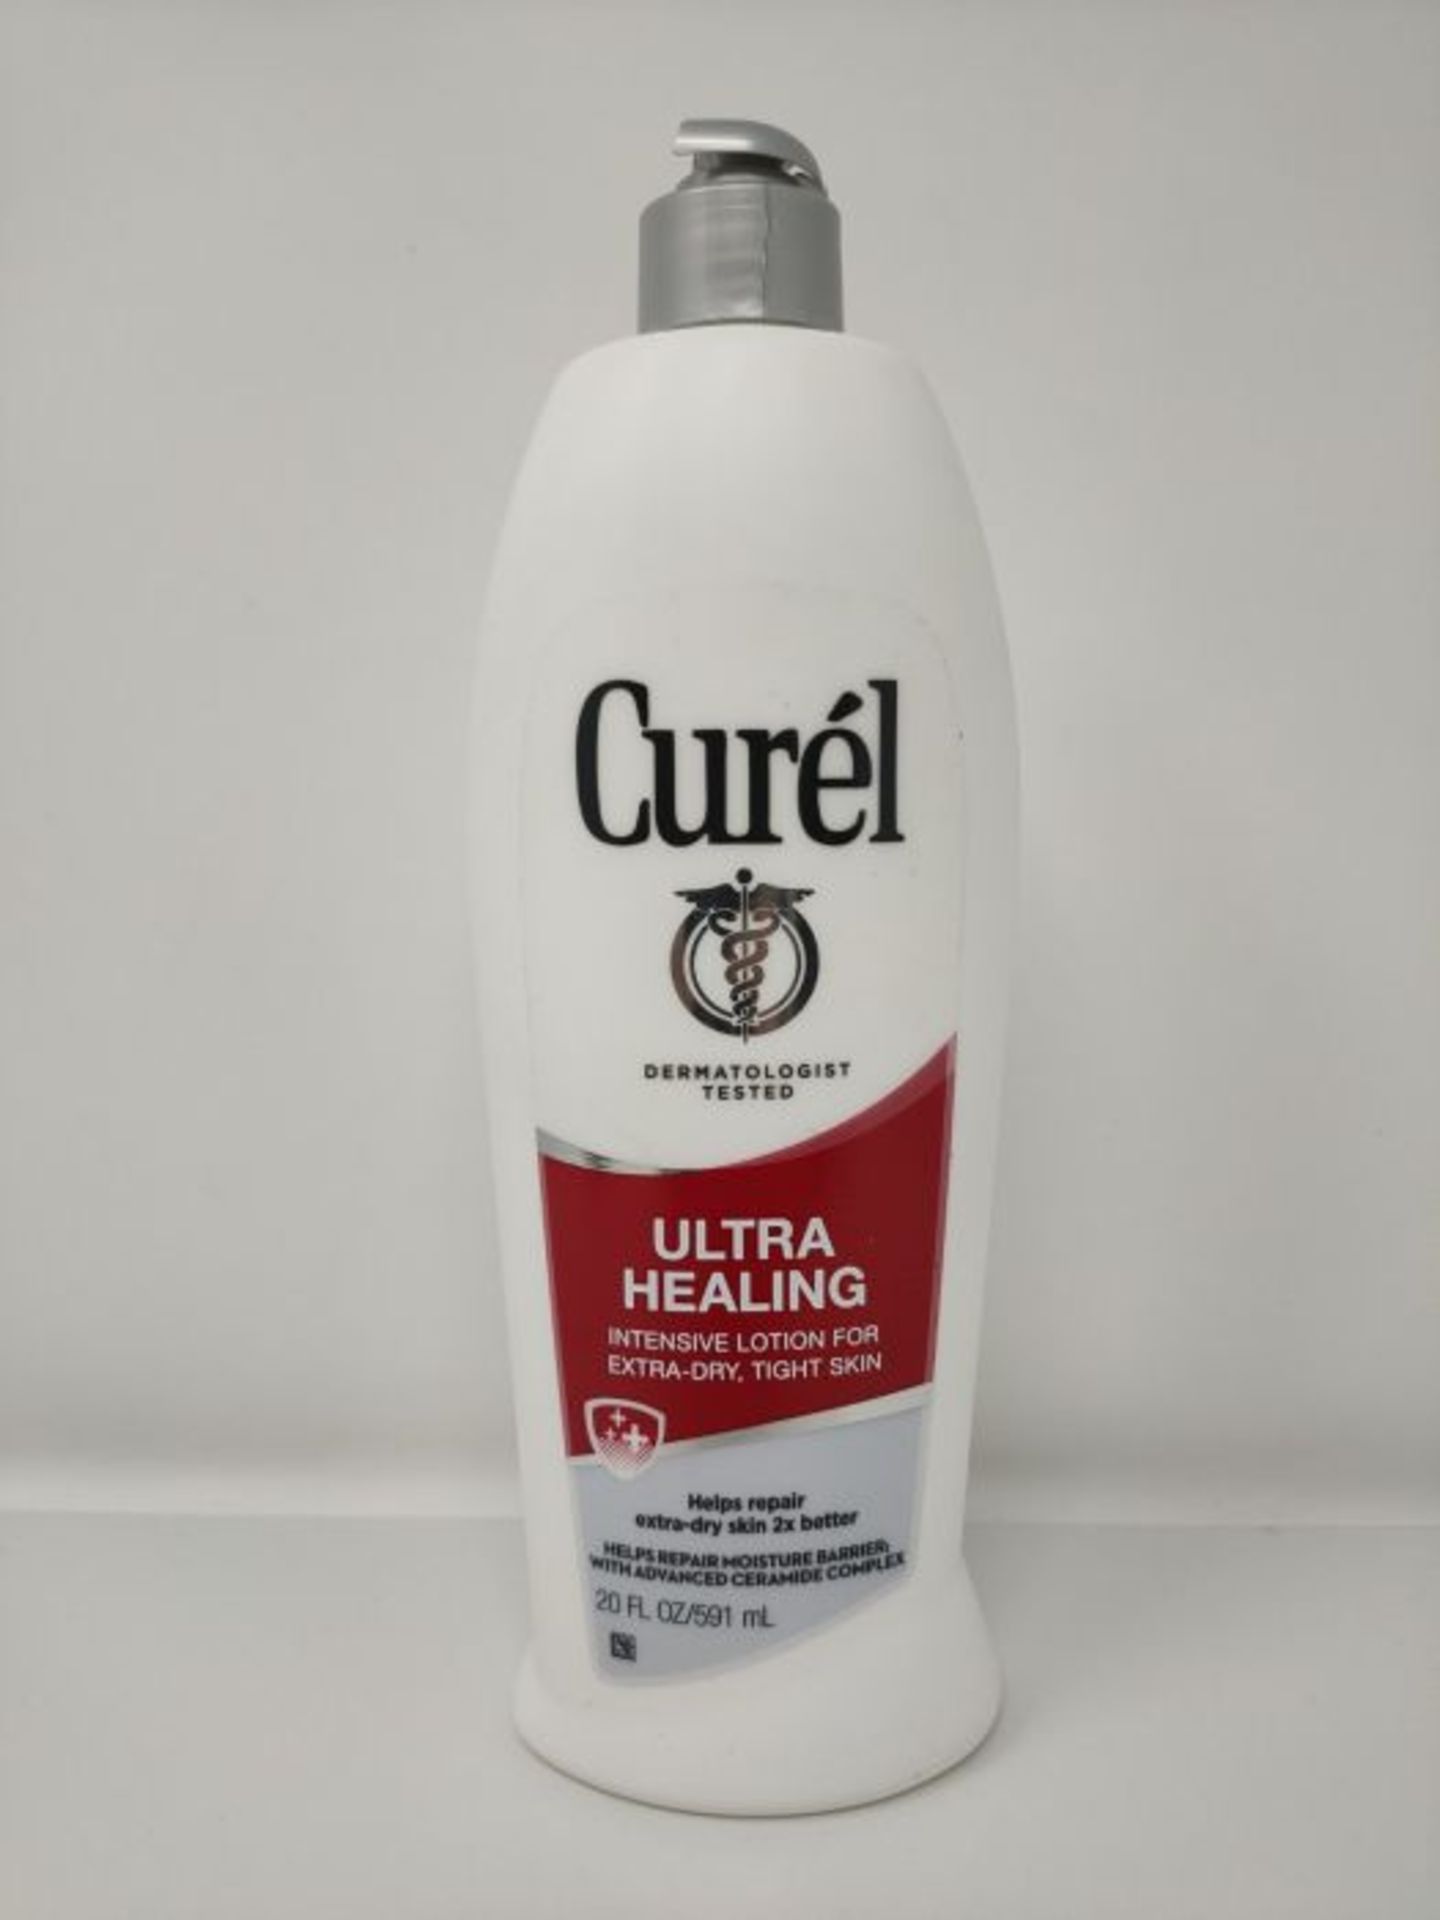 [CRACKED] Curél Ultra Healing Intensive Lotion for Extra-Dry, Tight Skin, 20 Ounces - Image 2 of 3